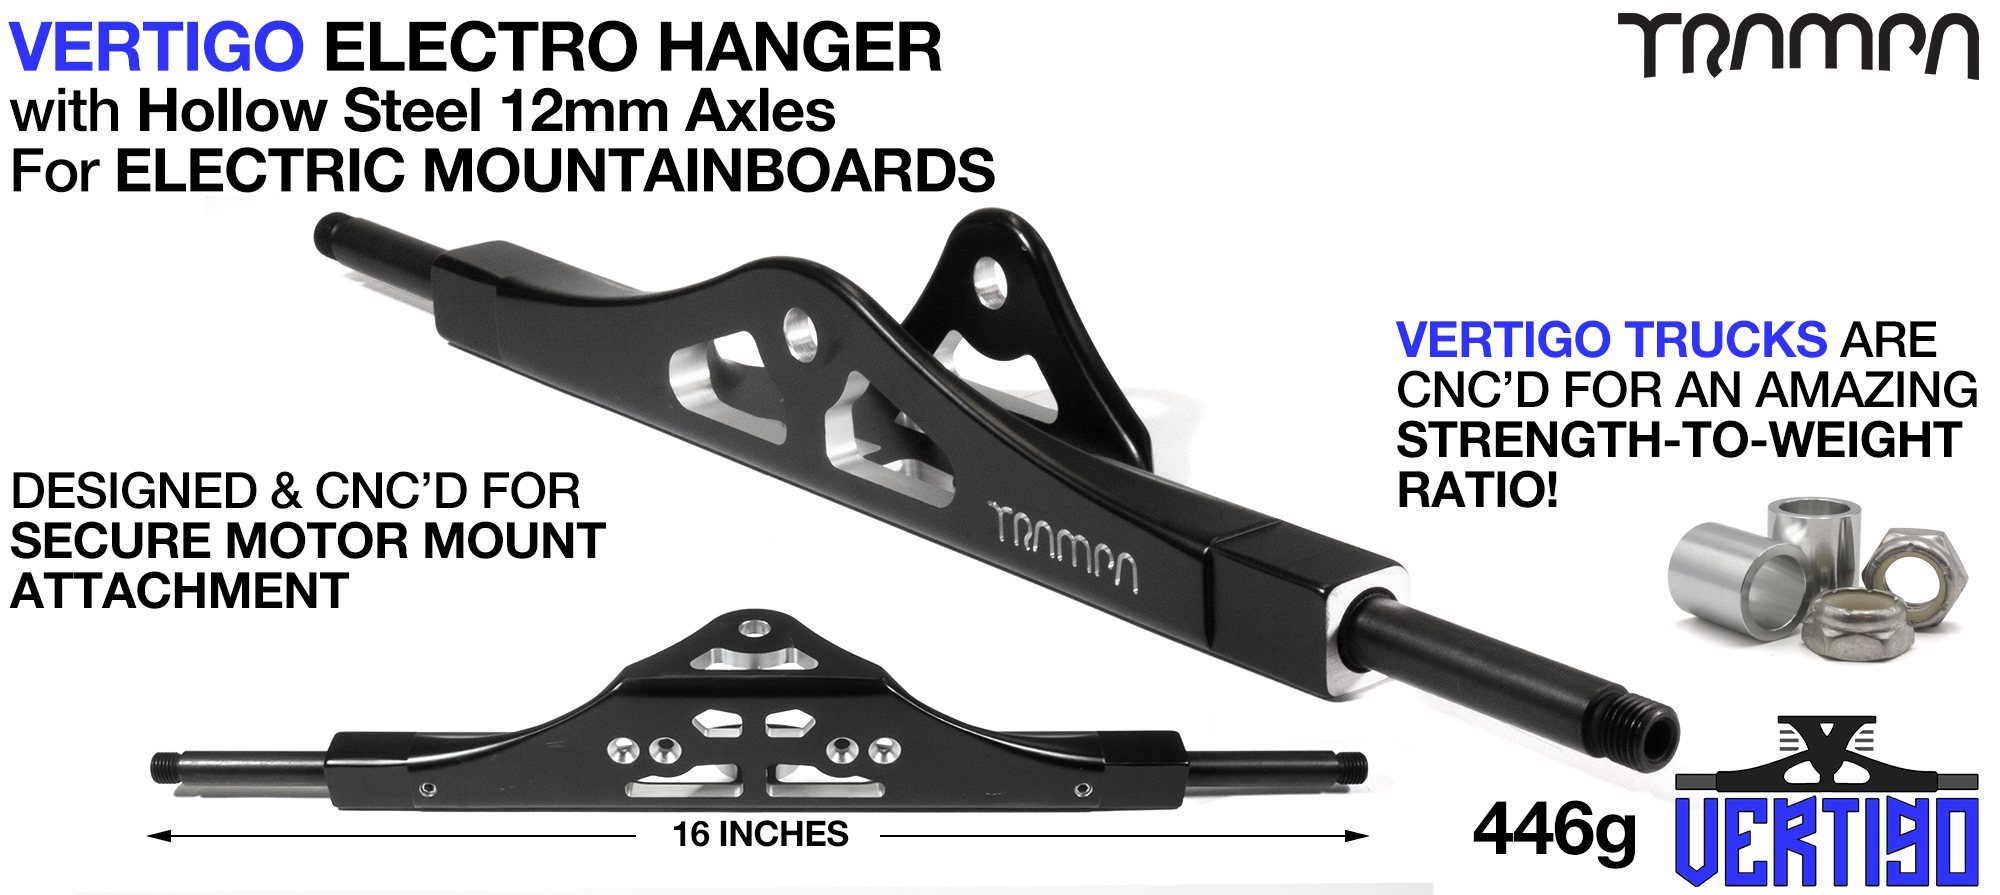 CNC Precision VERTIGO E-MTB Hanger - Used in conjunction with all PRO Series Mountainboard Motor Mounts - 16 inch wide